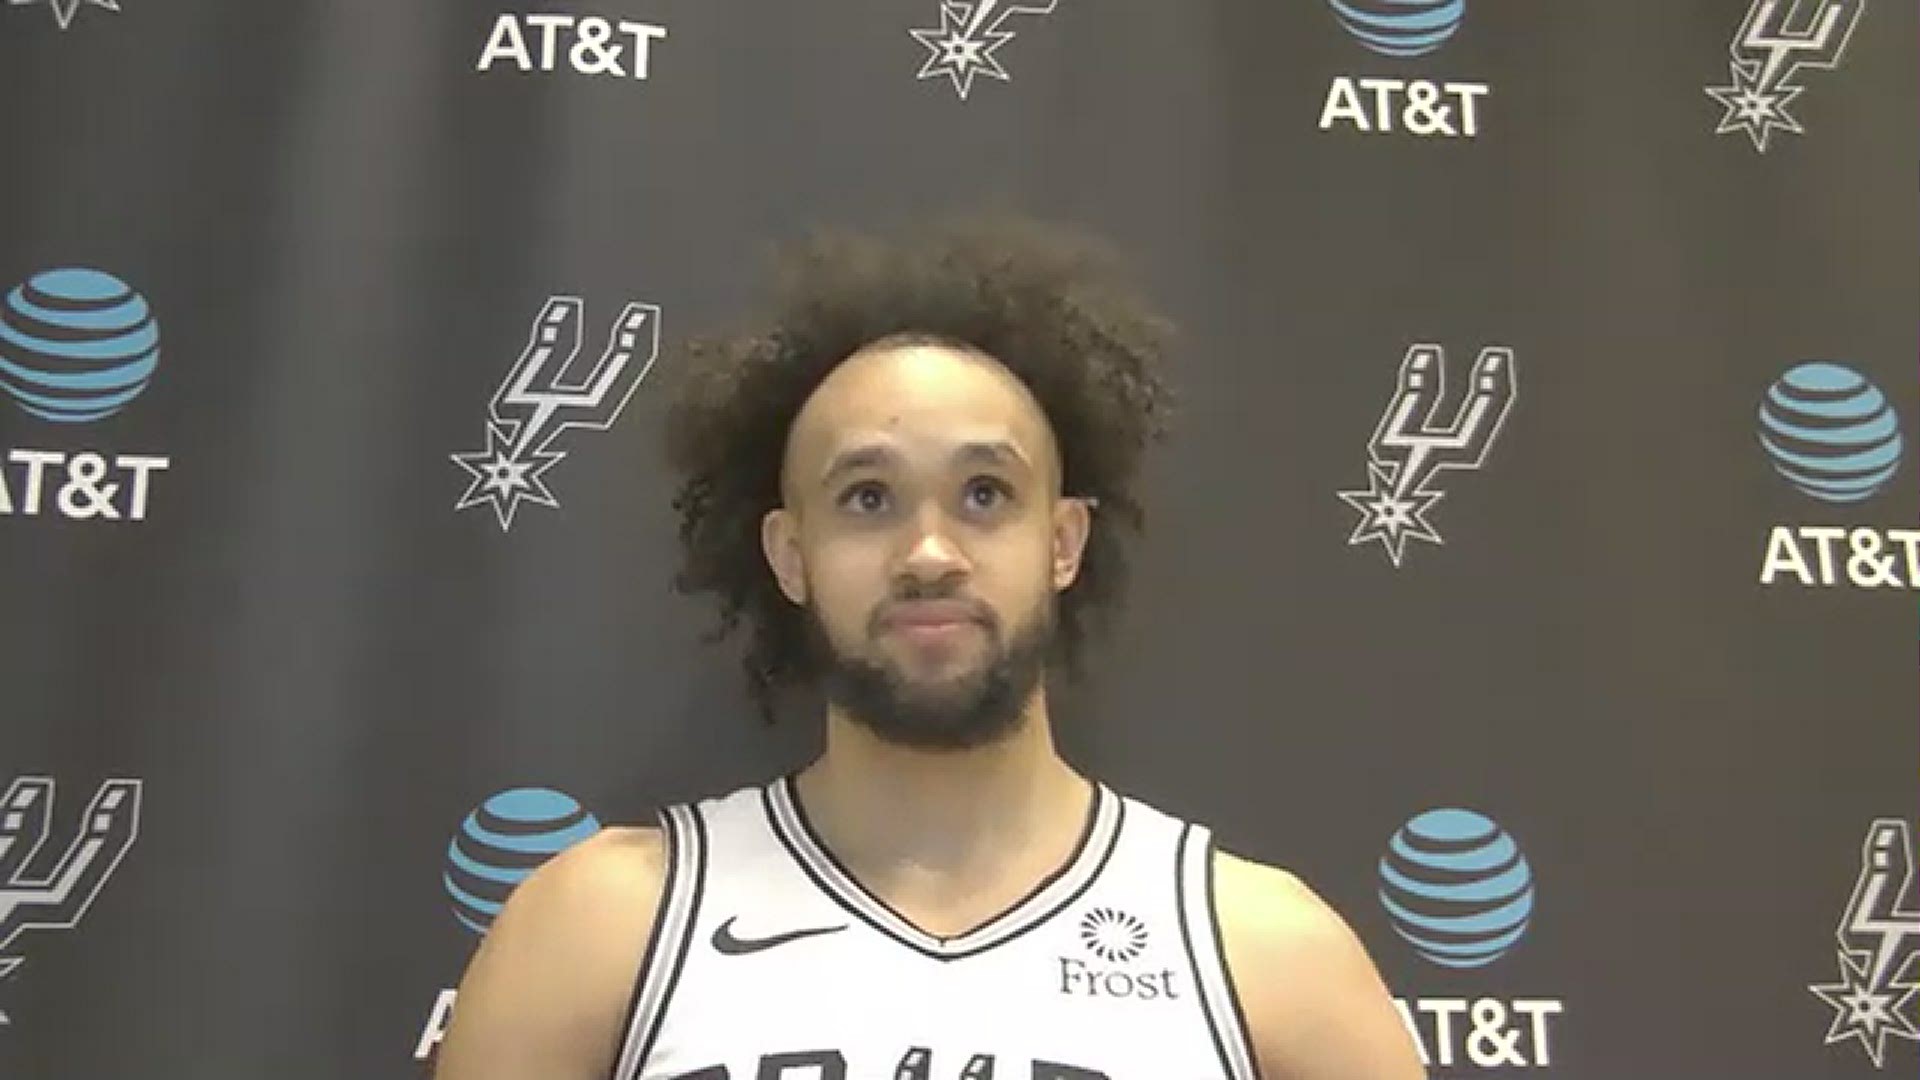 White spoke about getting back into a flow with his teammates and joked about Patty Mills' acrobatic layup after the win.